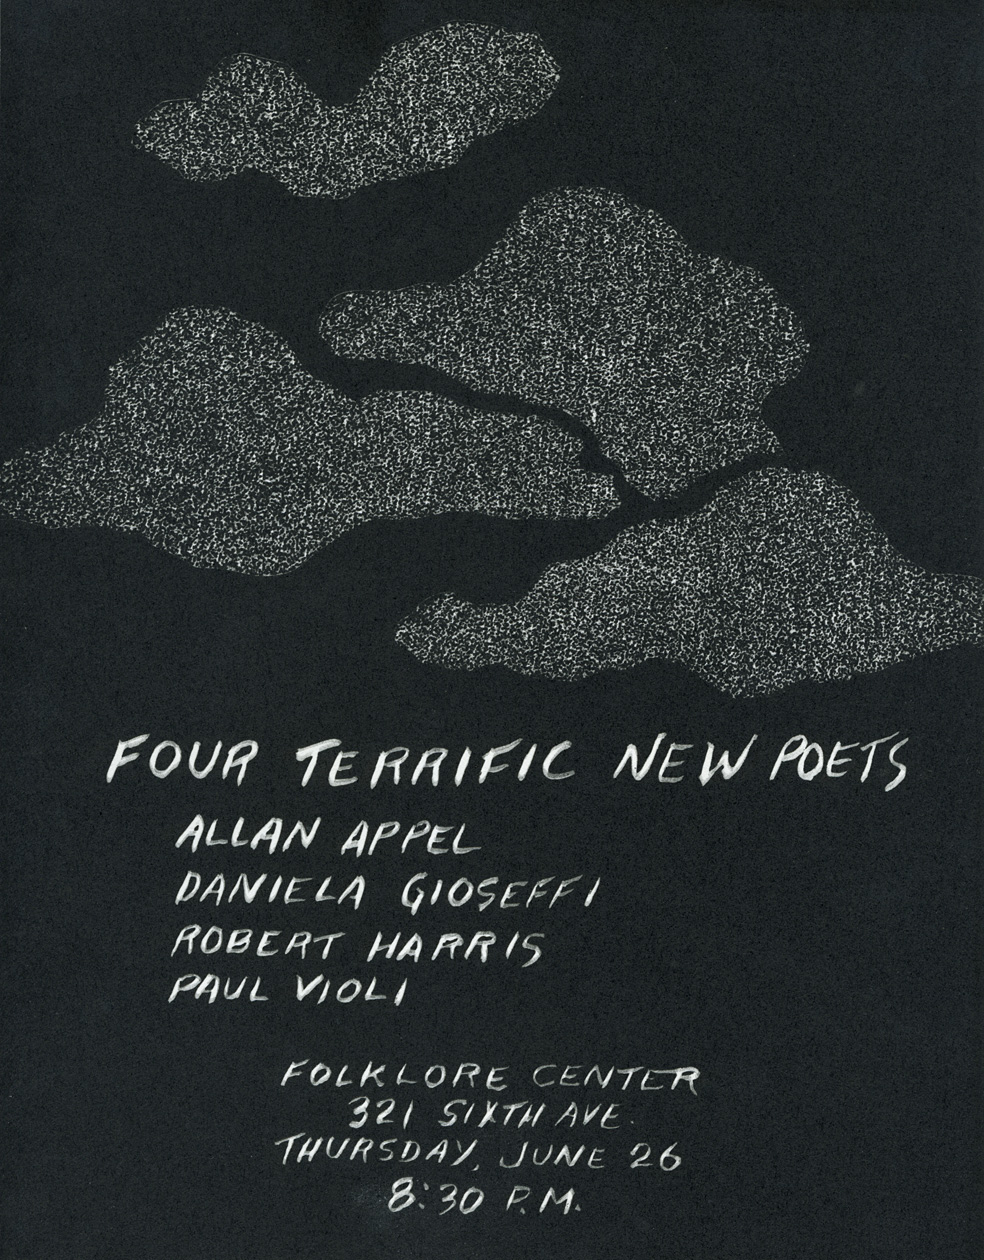 Flyer for a reading by Allan Appel, Daniella Gioseffi, Robert Harris, and Paul Violi at the Folklore Center, New York City, June 26 [no year]. 7 7/8  x 10 1/8 inches. 